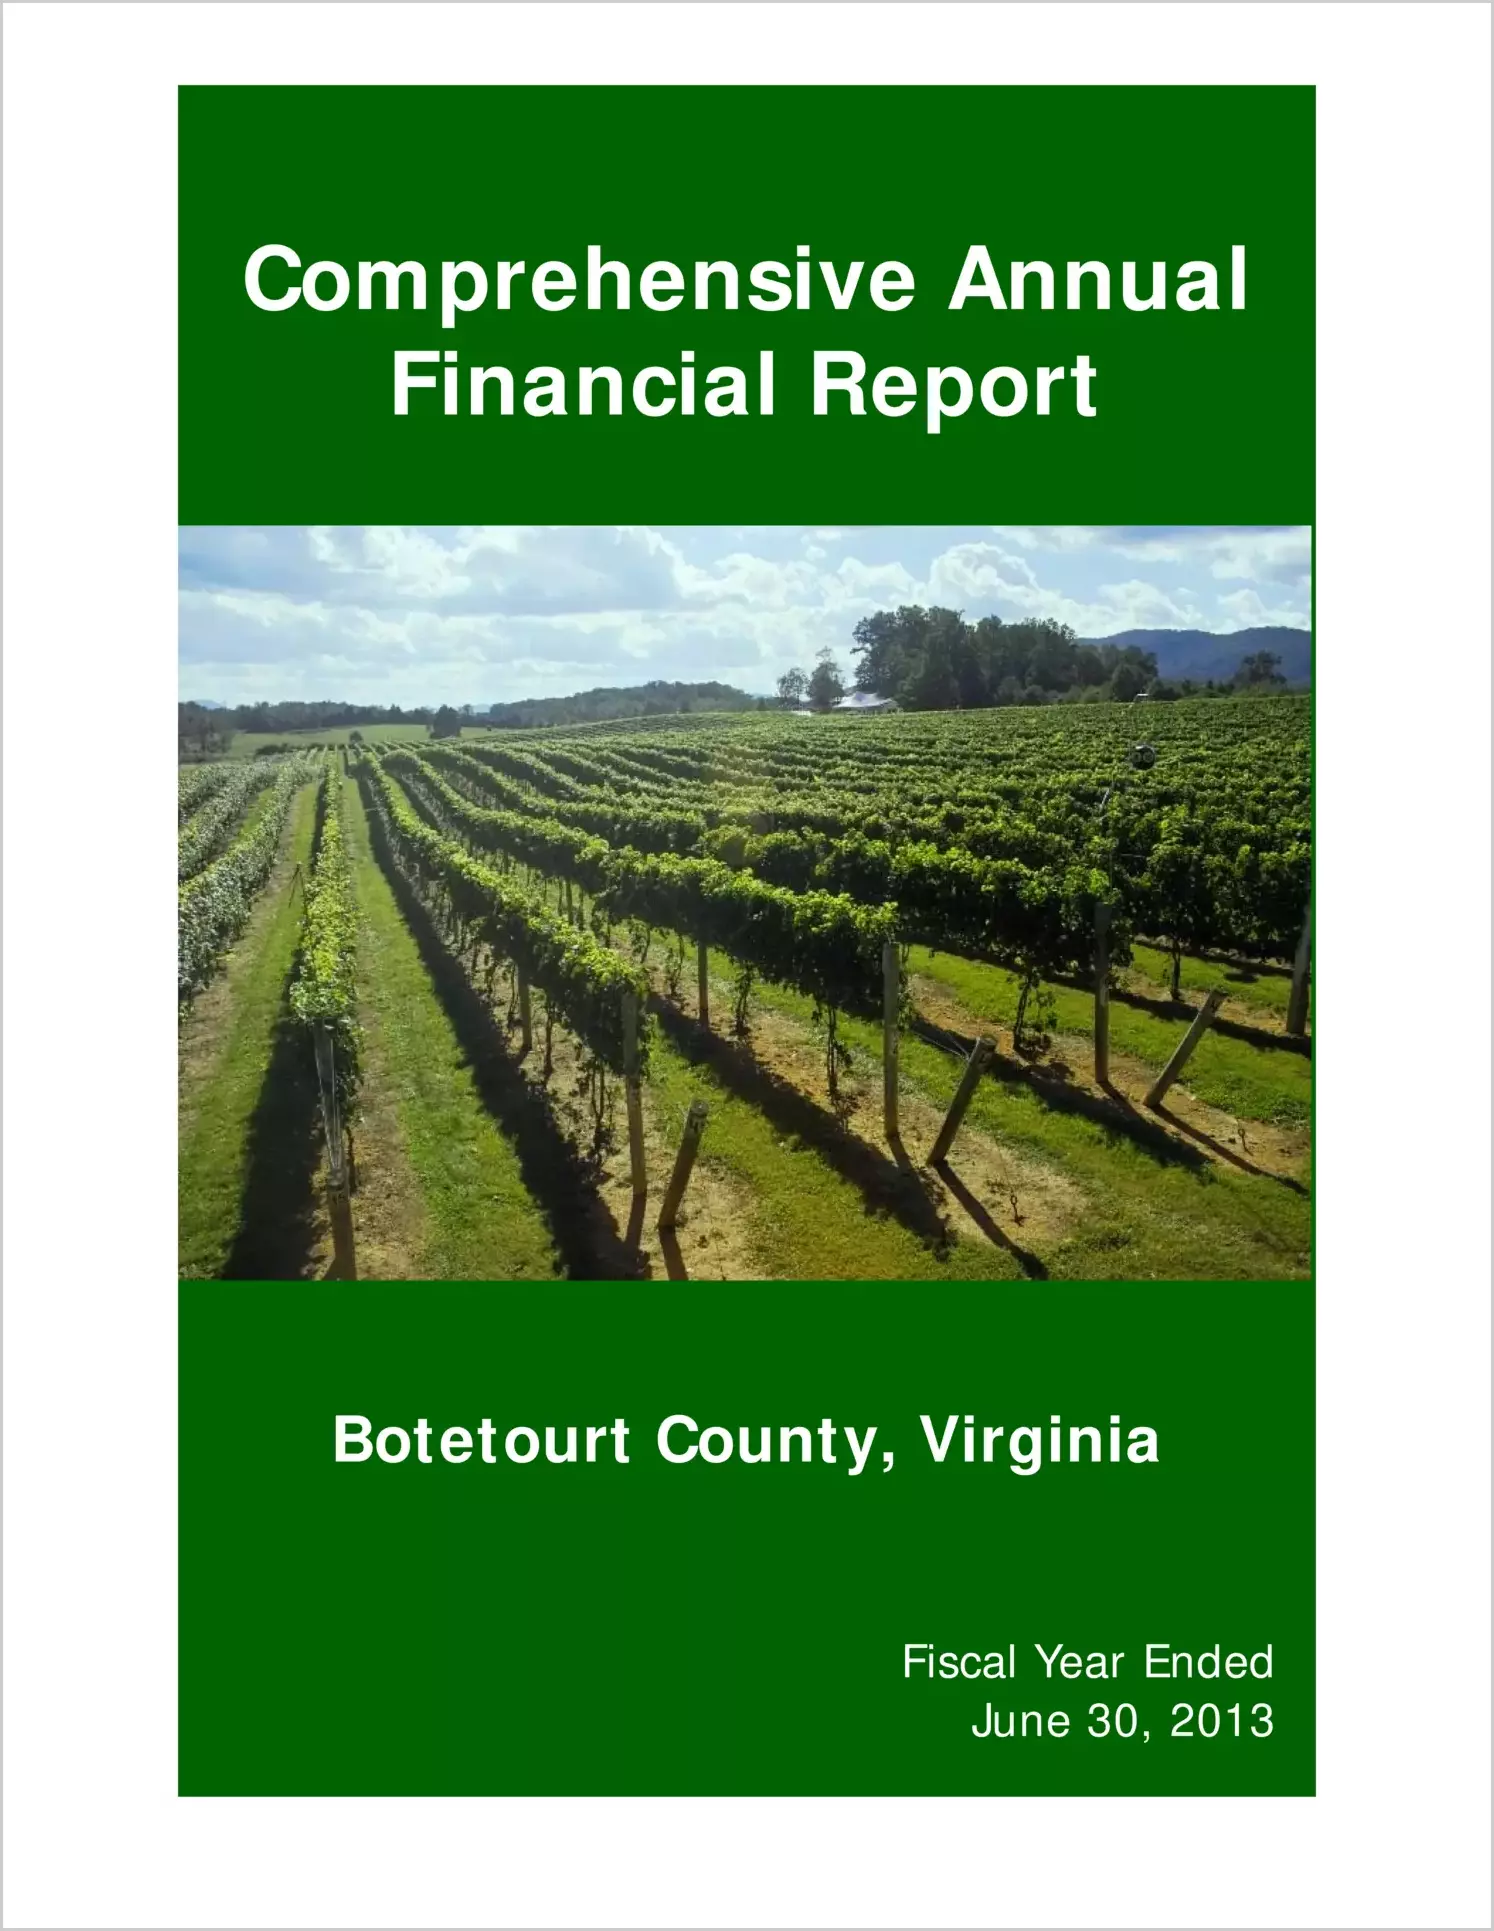 2013 Annual Financial Report for County of Botetourt